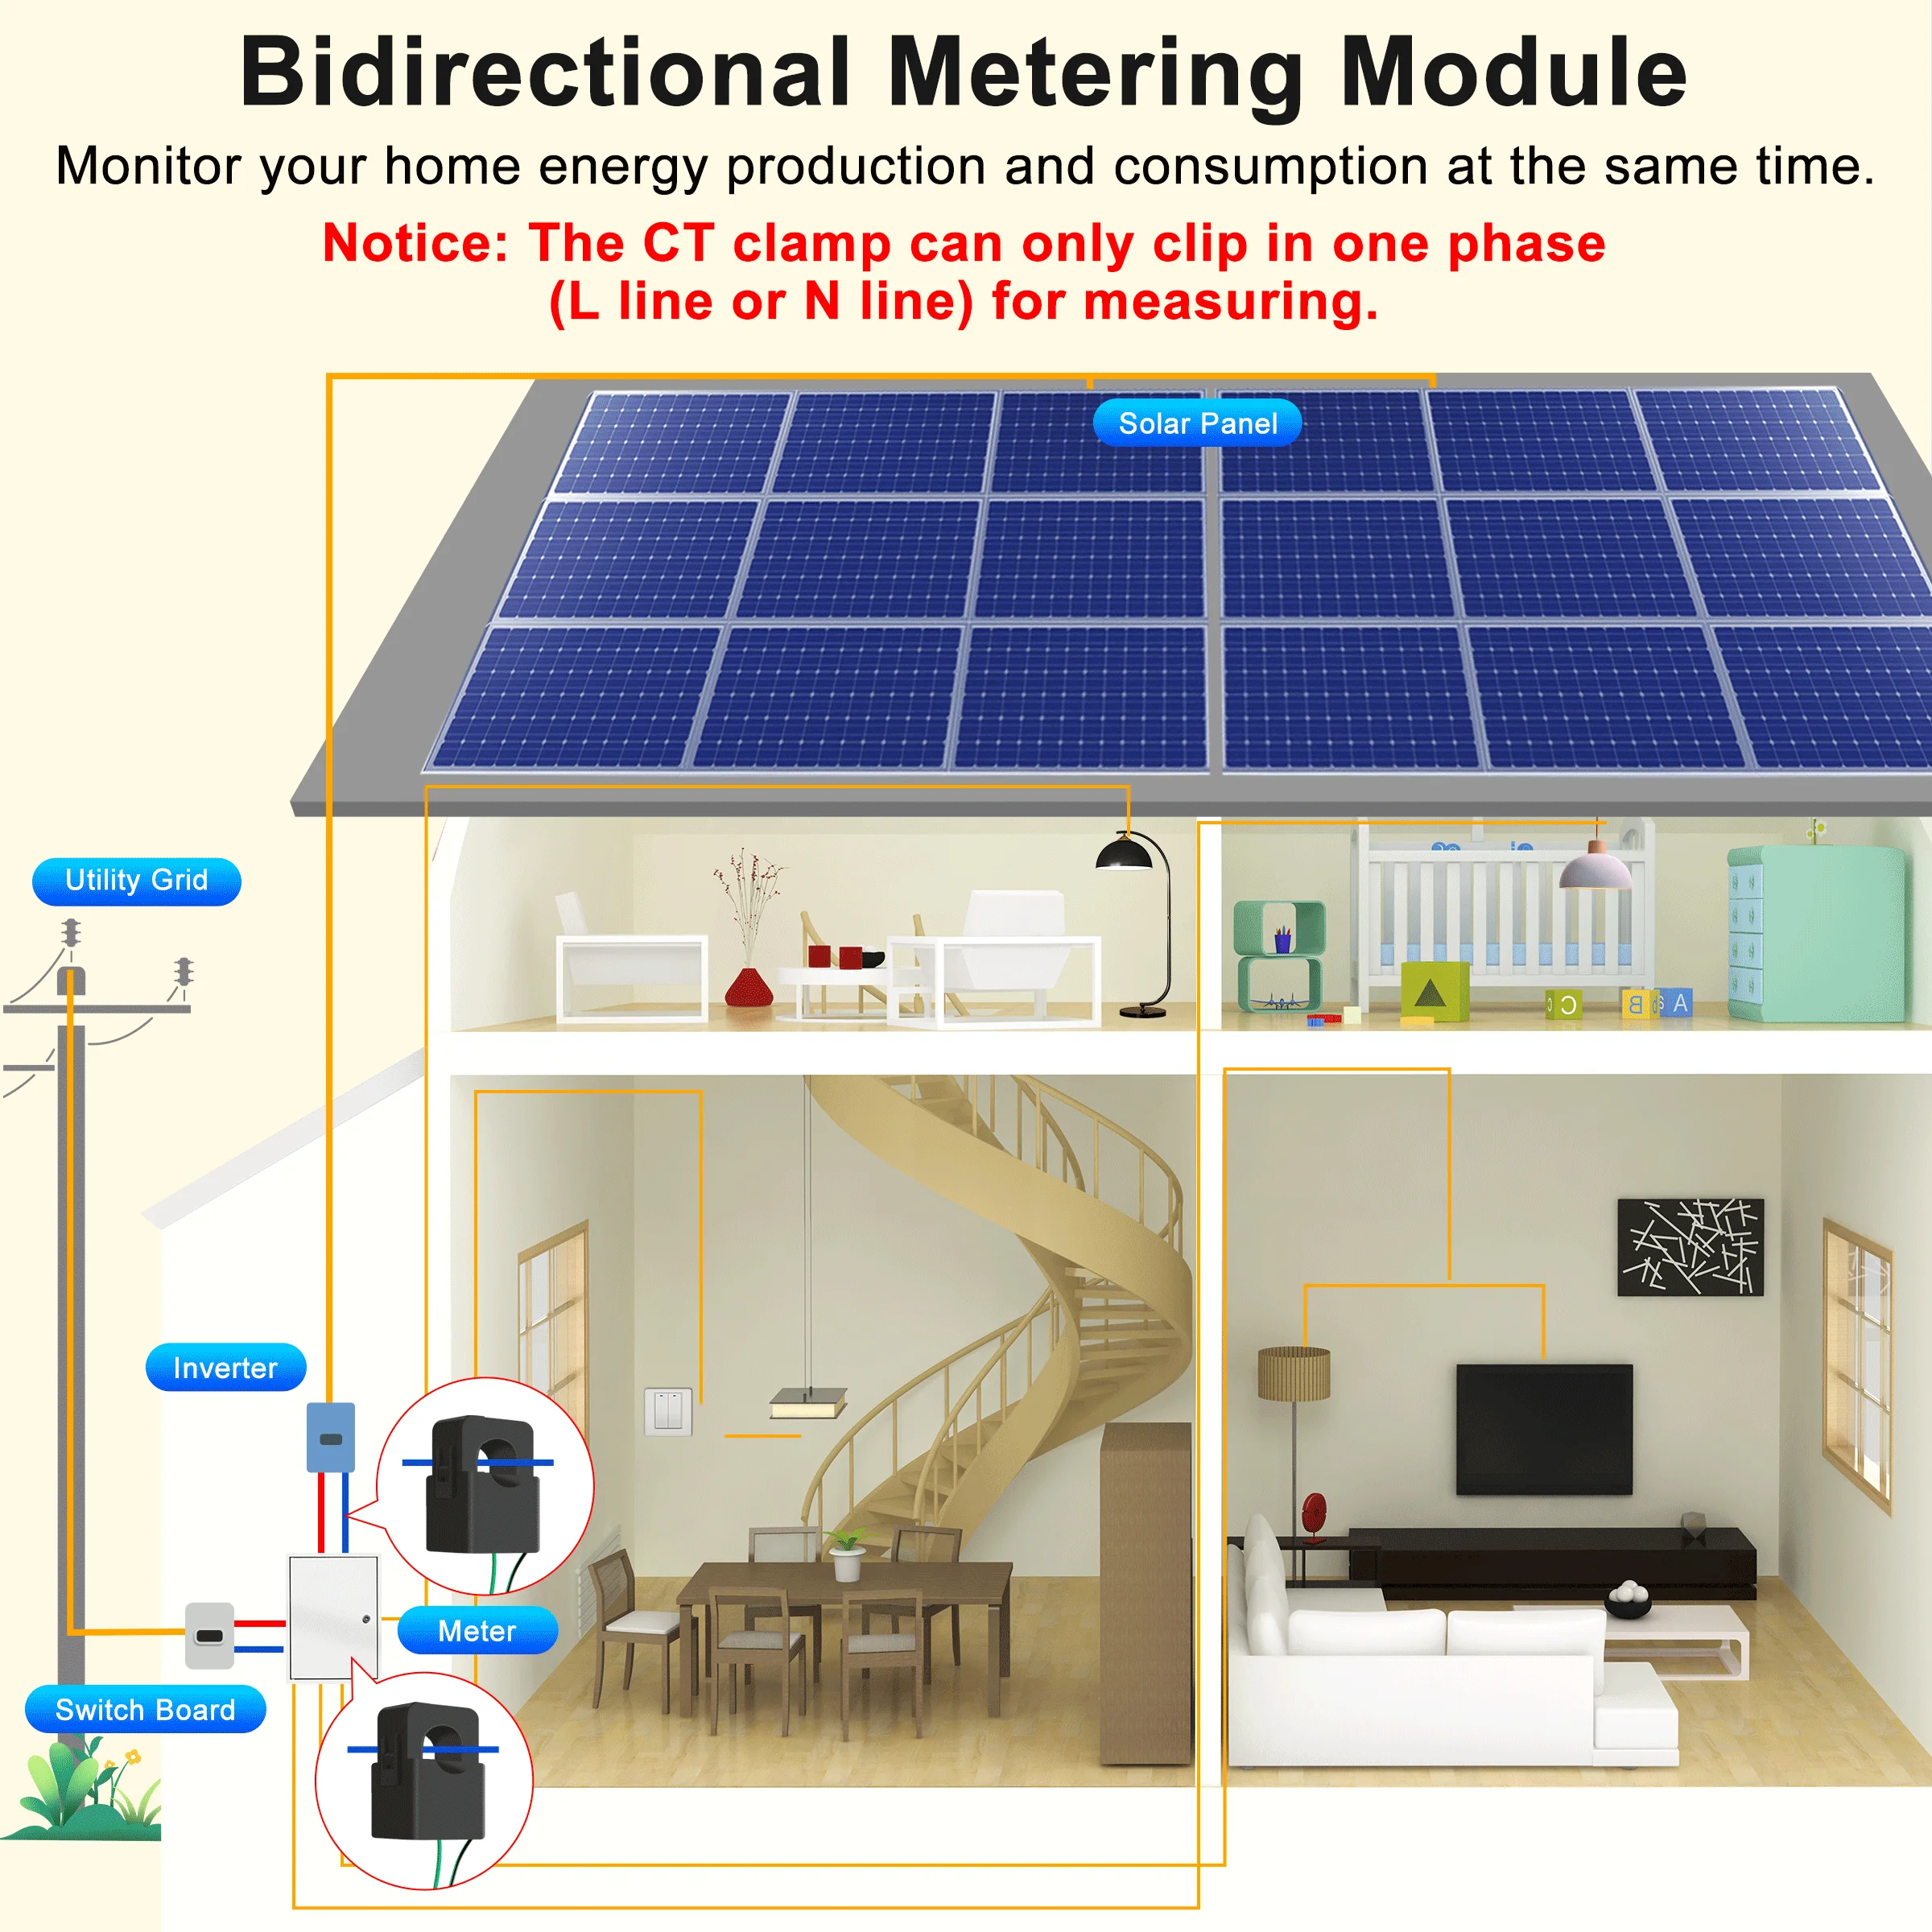 GIRIER Smart WiFi Power Meter Clamp Smart Home Energy Monitor Real-Time Tracking Electric Usage Bidirectional Solar Net Metering